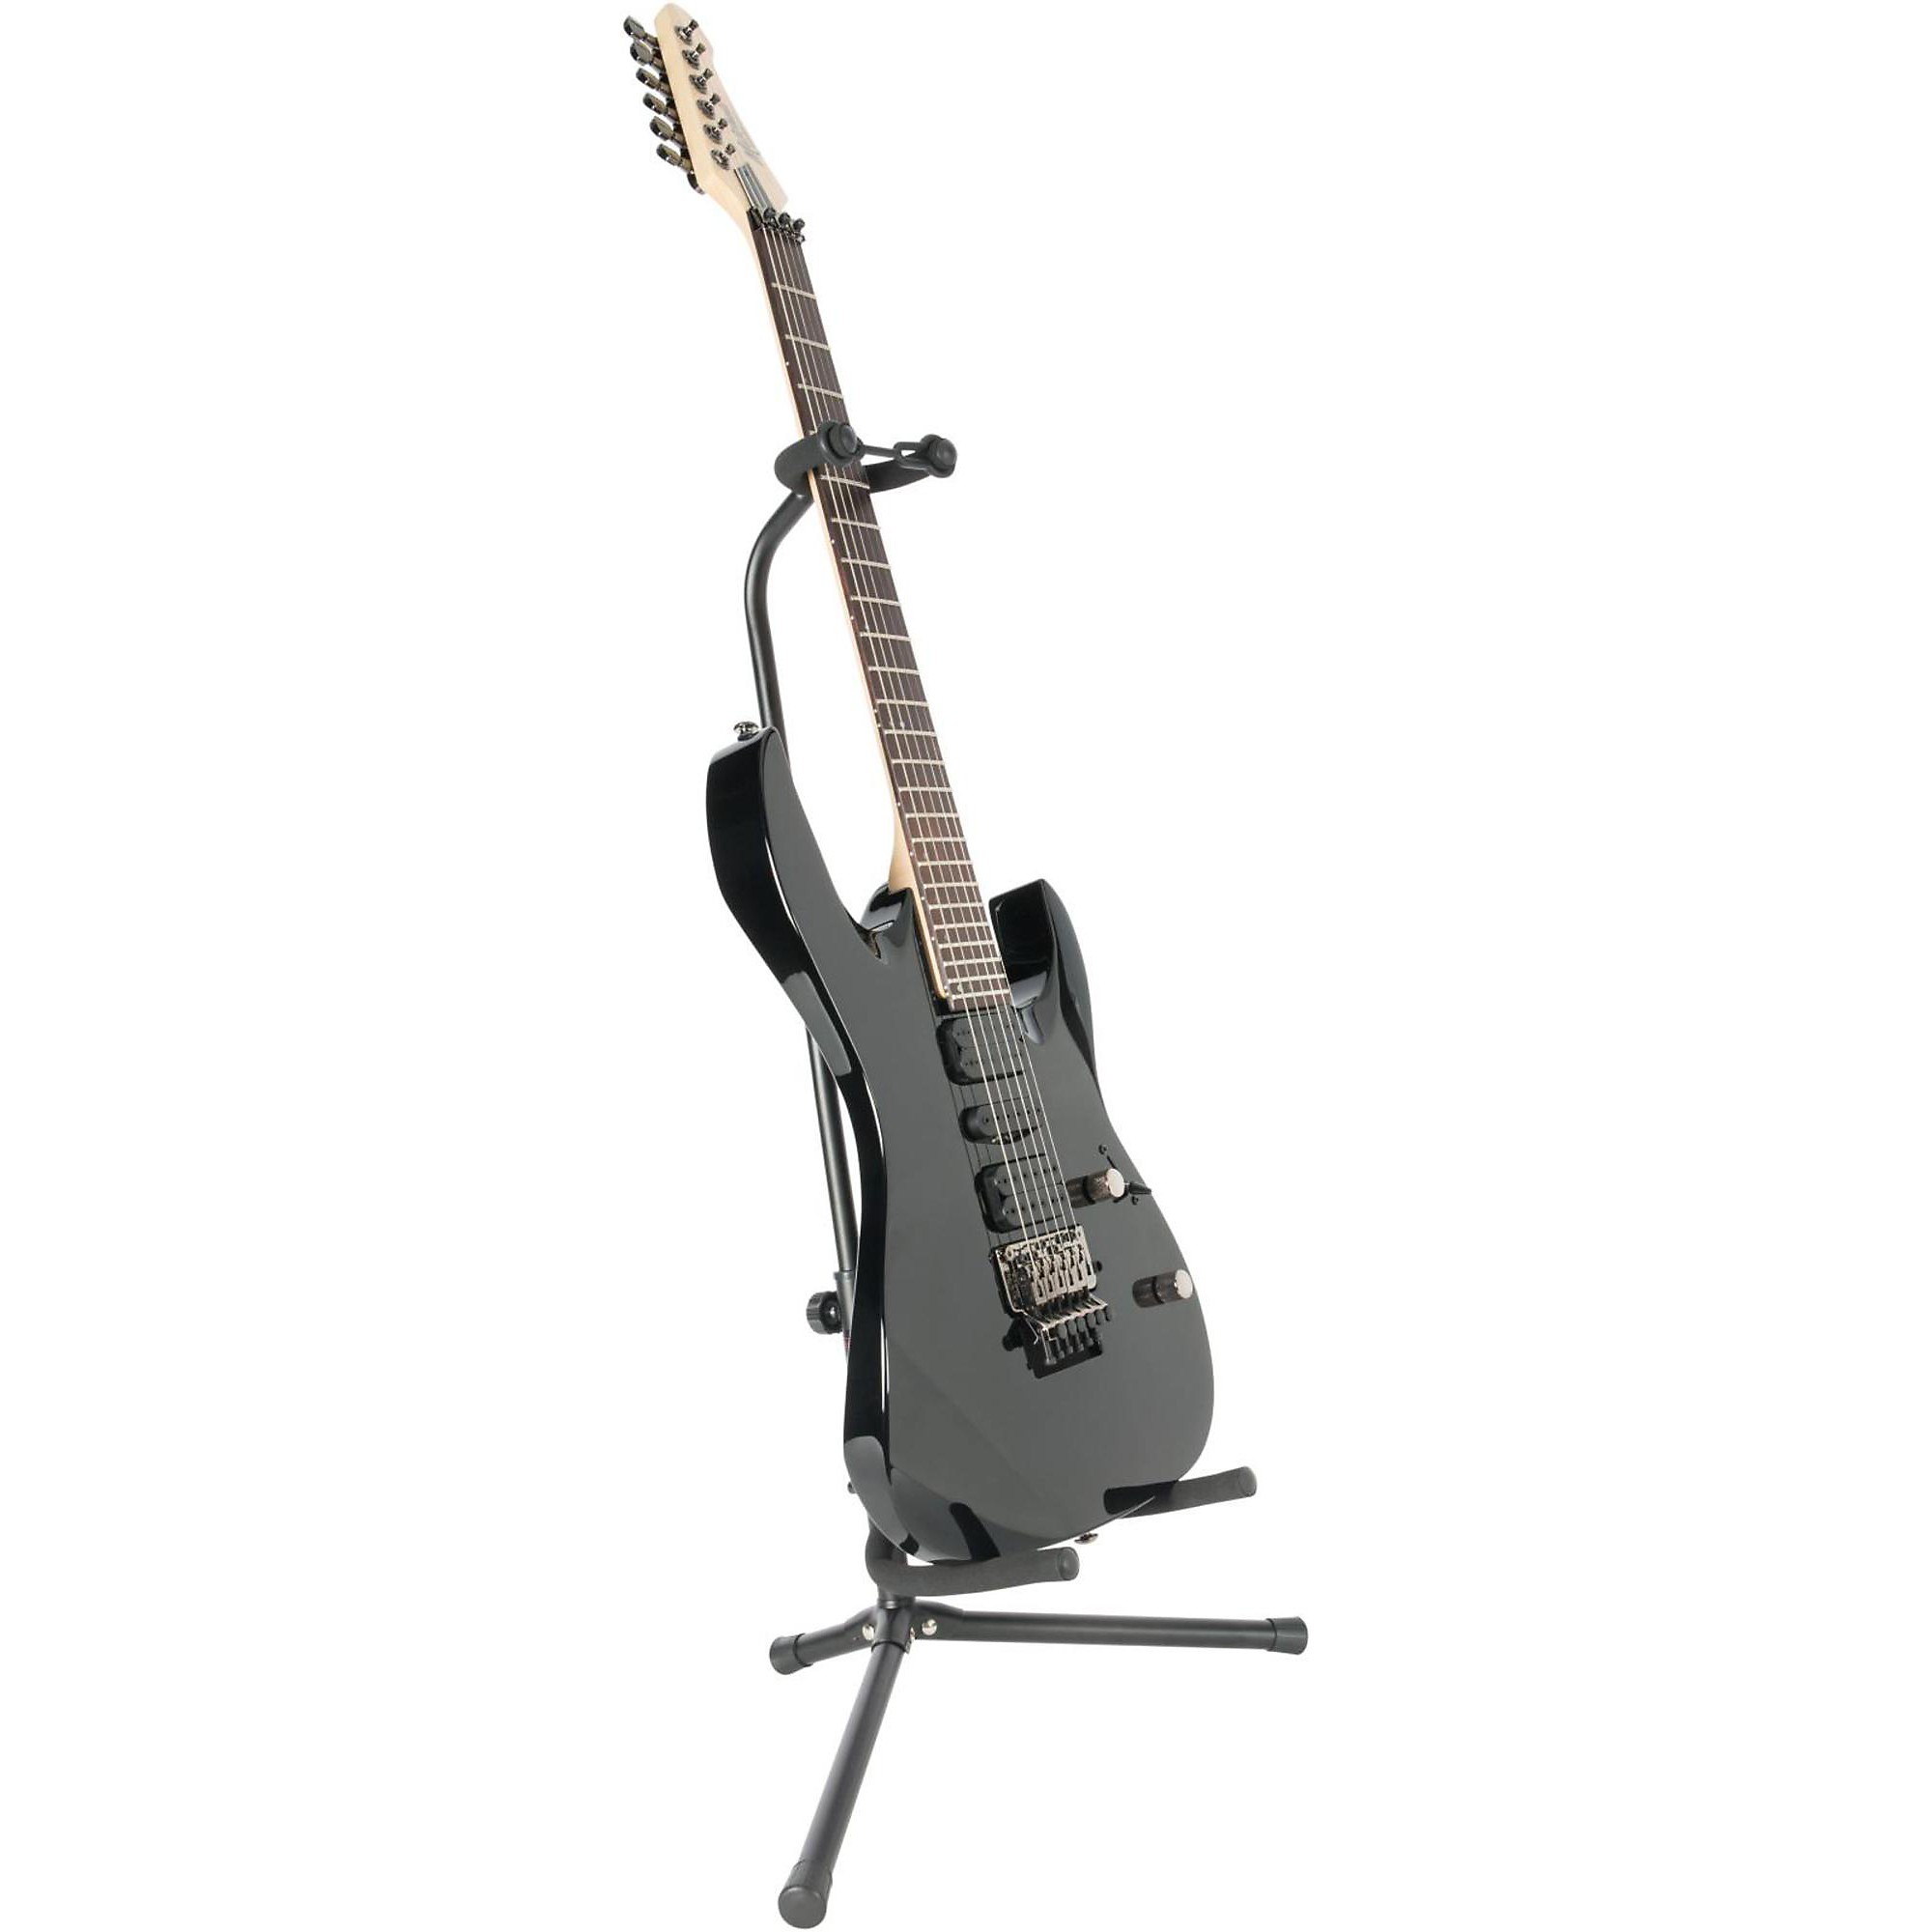   Basics Adjustable Guitar Folding A-Shape Frame Stand for  Acoustic and Electric Guitars with Non-Slip Rubber and Soft Foam Arms,  Fully Assembled, Black : Musical Instruments